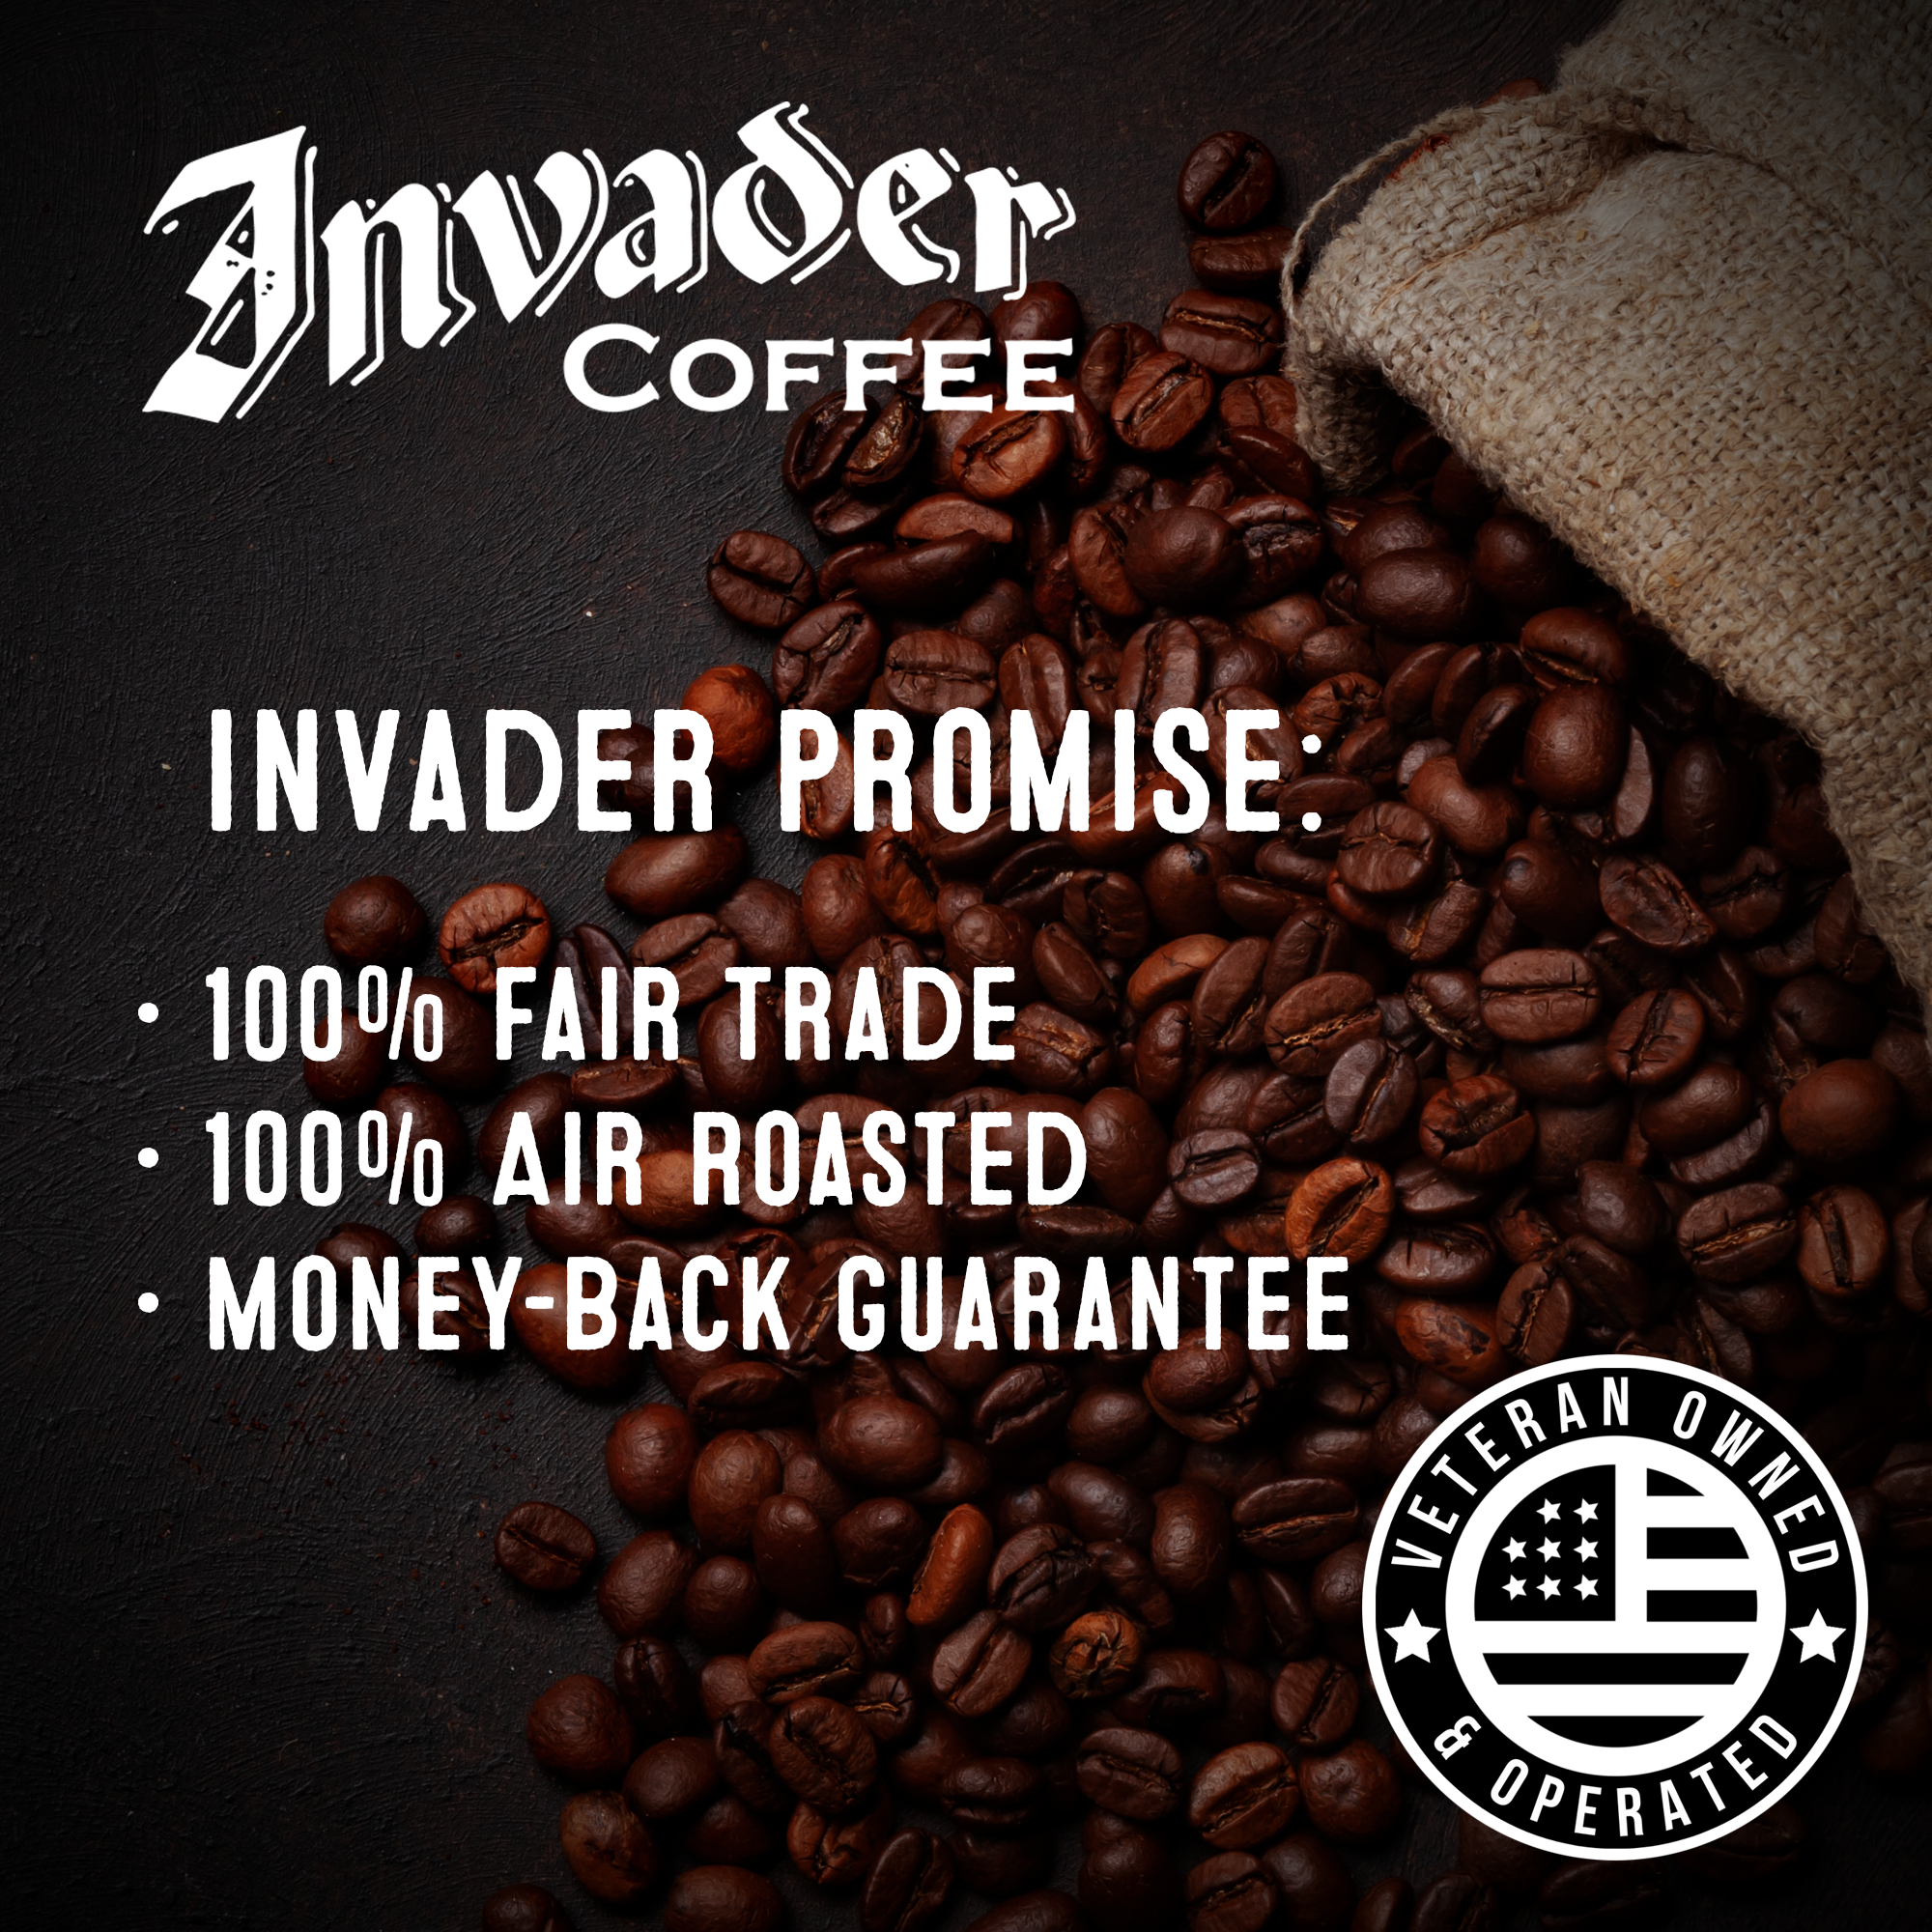  Invader Coffee Whiskey Blend by Invader Coffee Invader Coffee Perfumarie